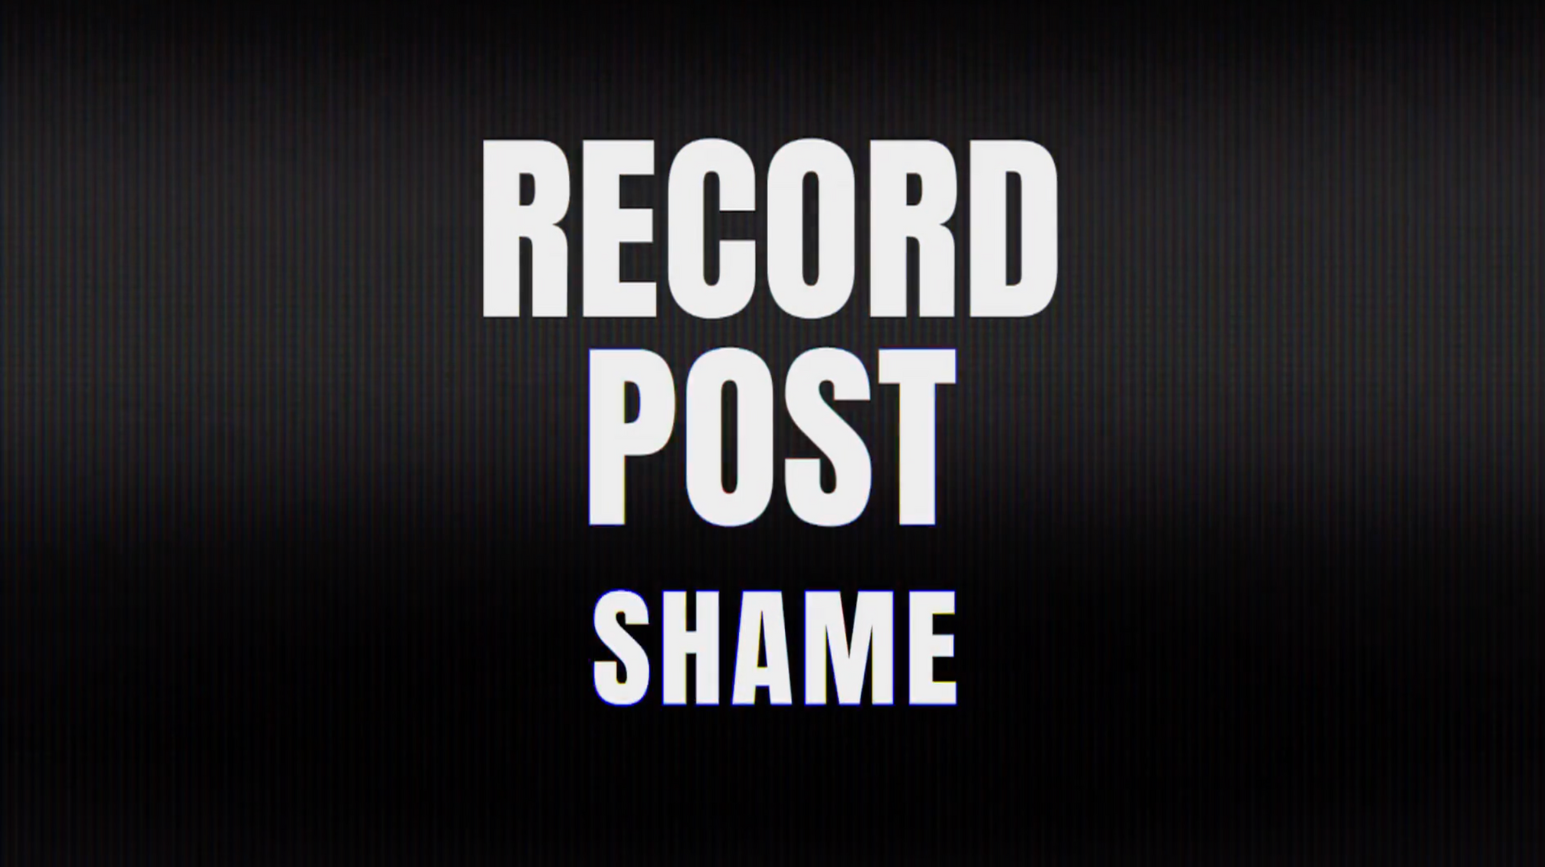 Record, Post, Shamed: Are You Safe In Public?